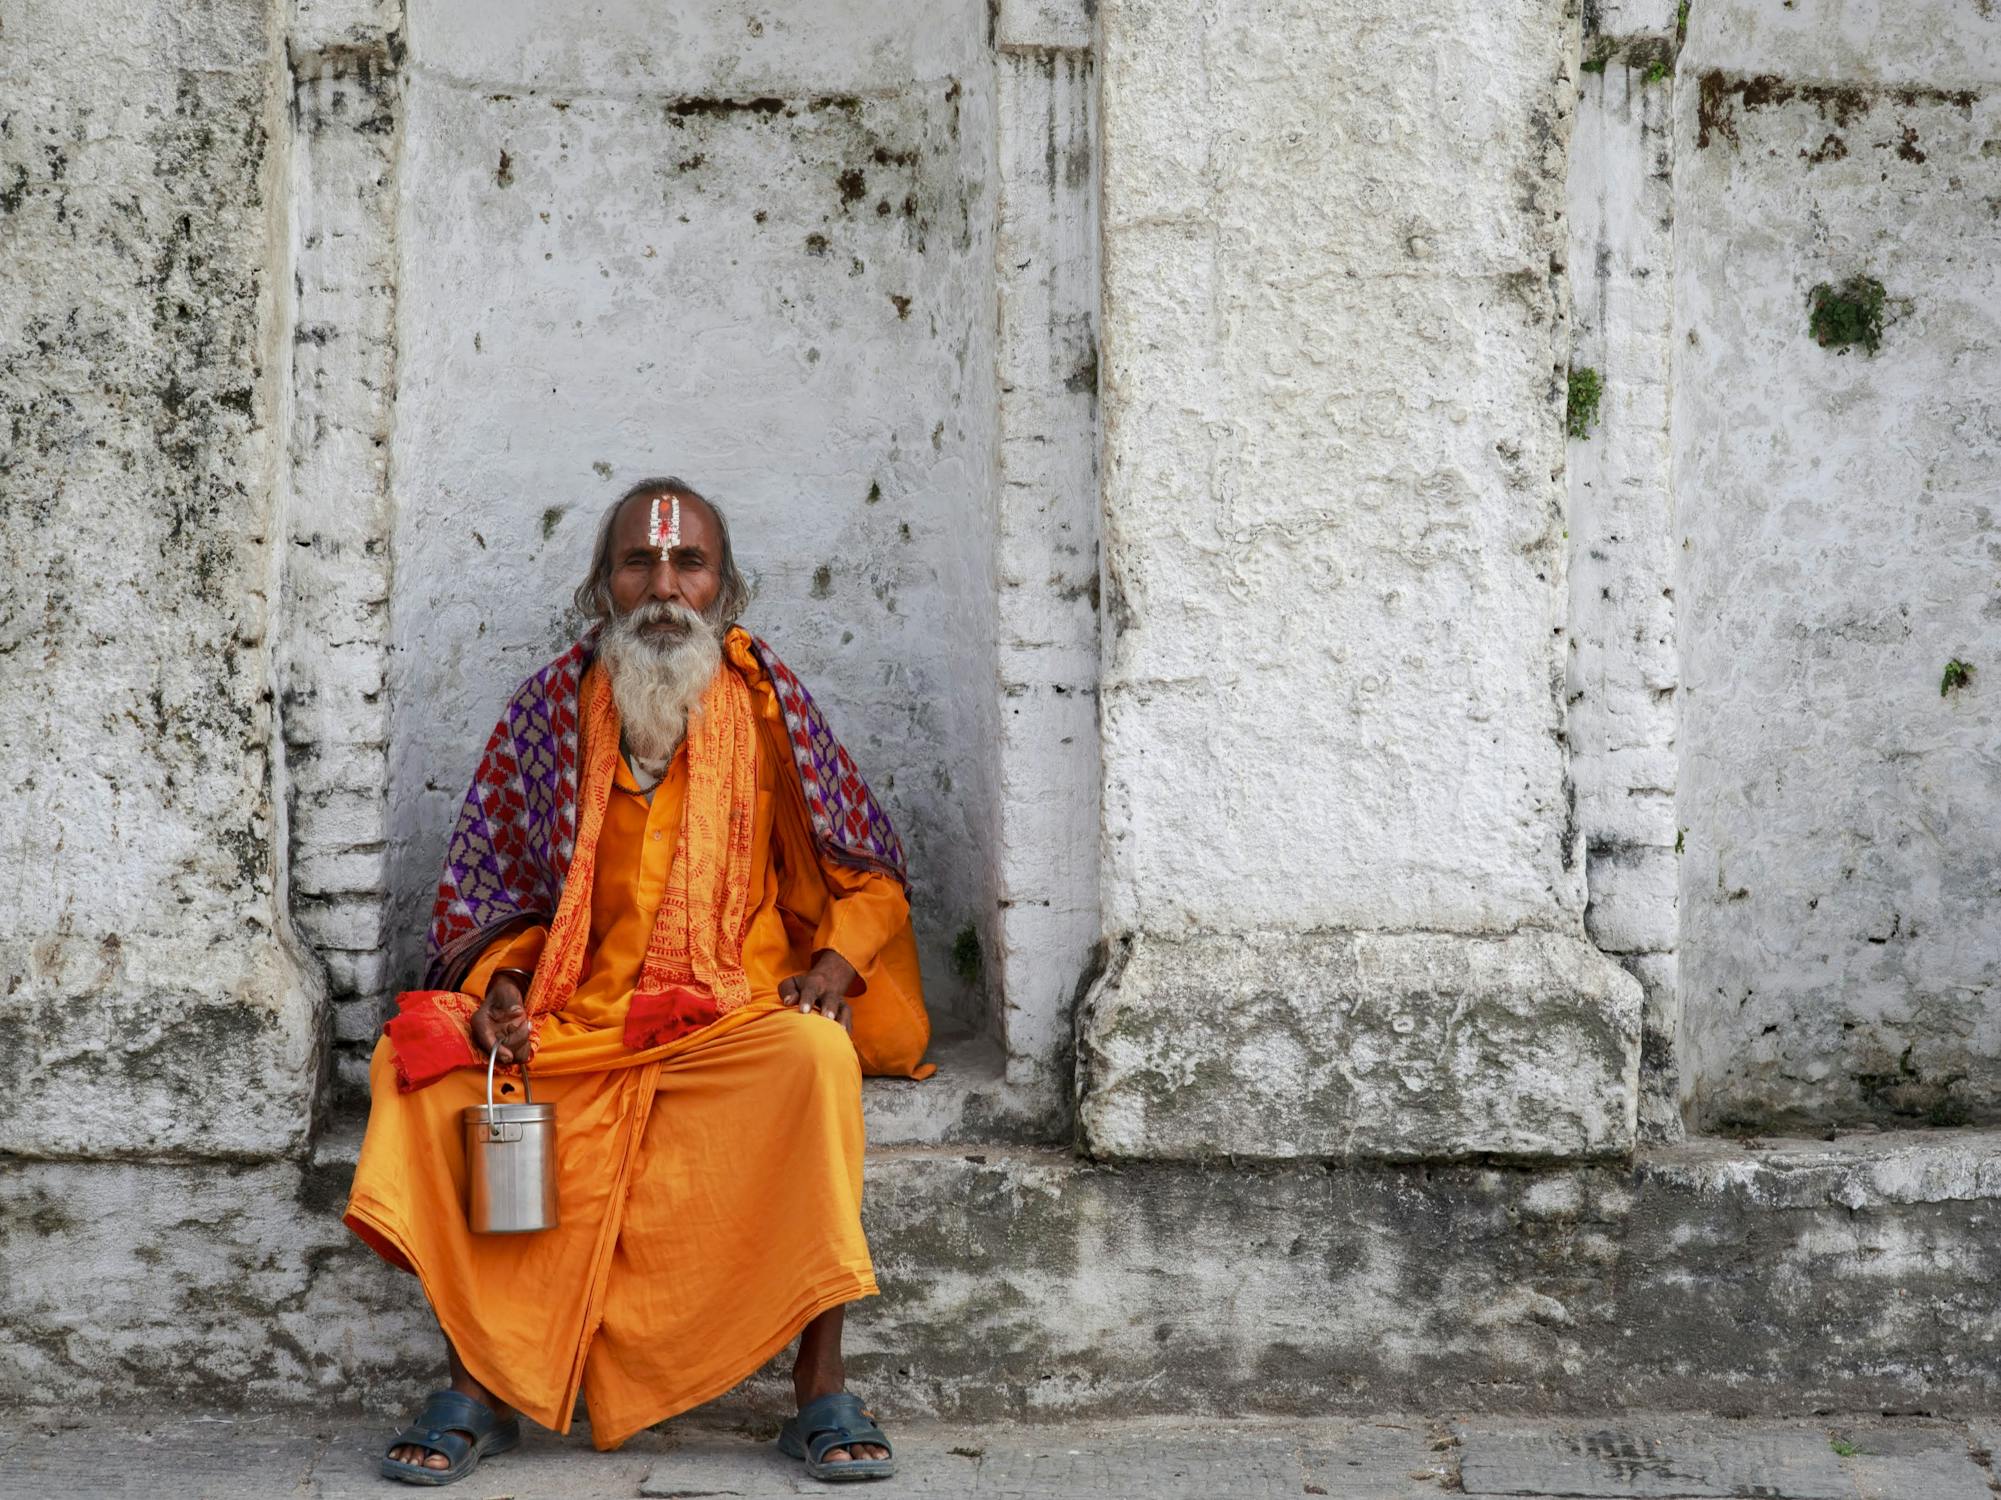 Hindu Priest Photo by Mehmet Turgut  Kirkgoz  from Pexels: https://www.pexels.com/photo/indian-man-in-traditional-indian-clothes-sitting-on-a-concrete-11486450/